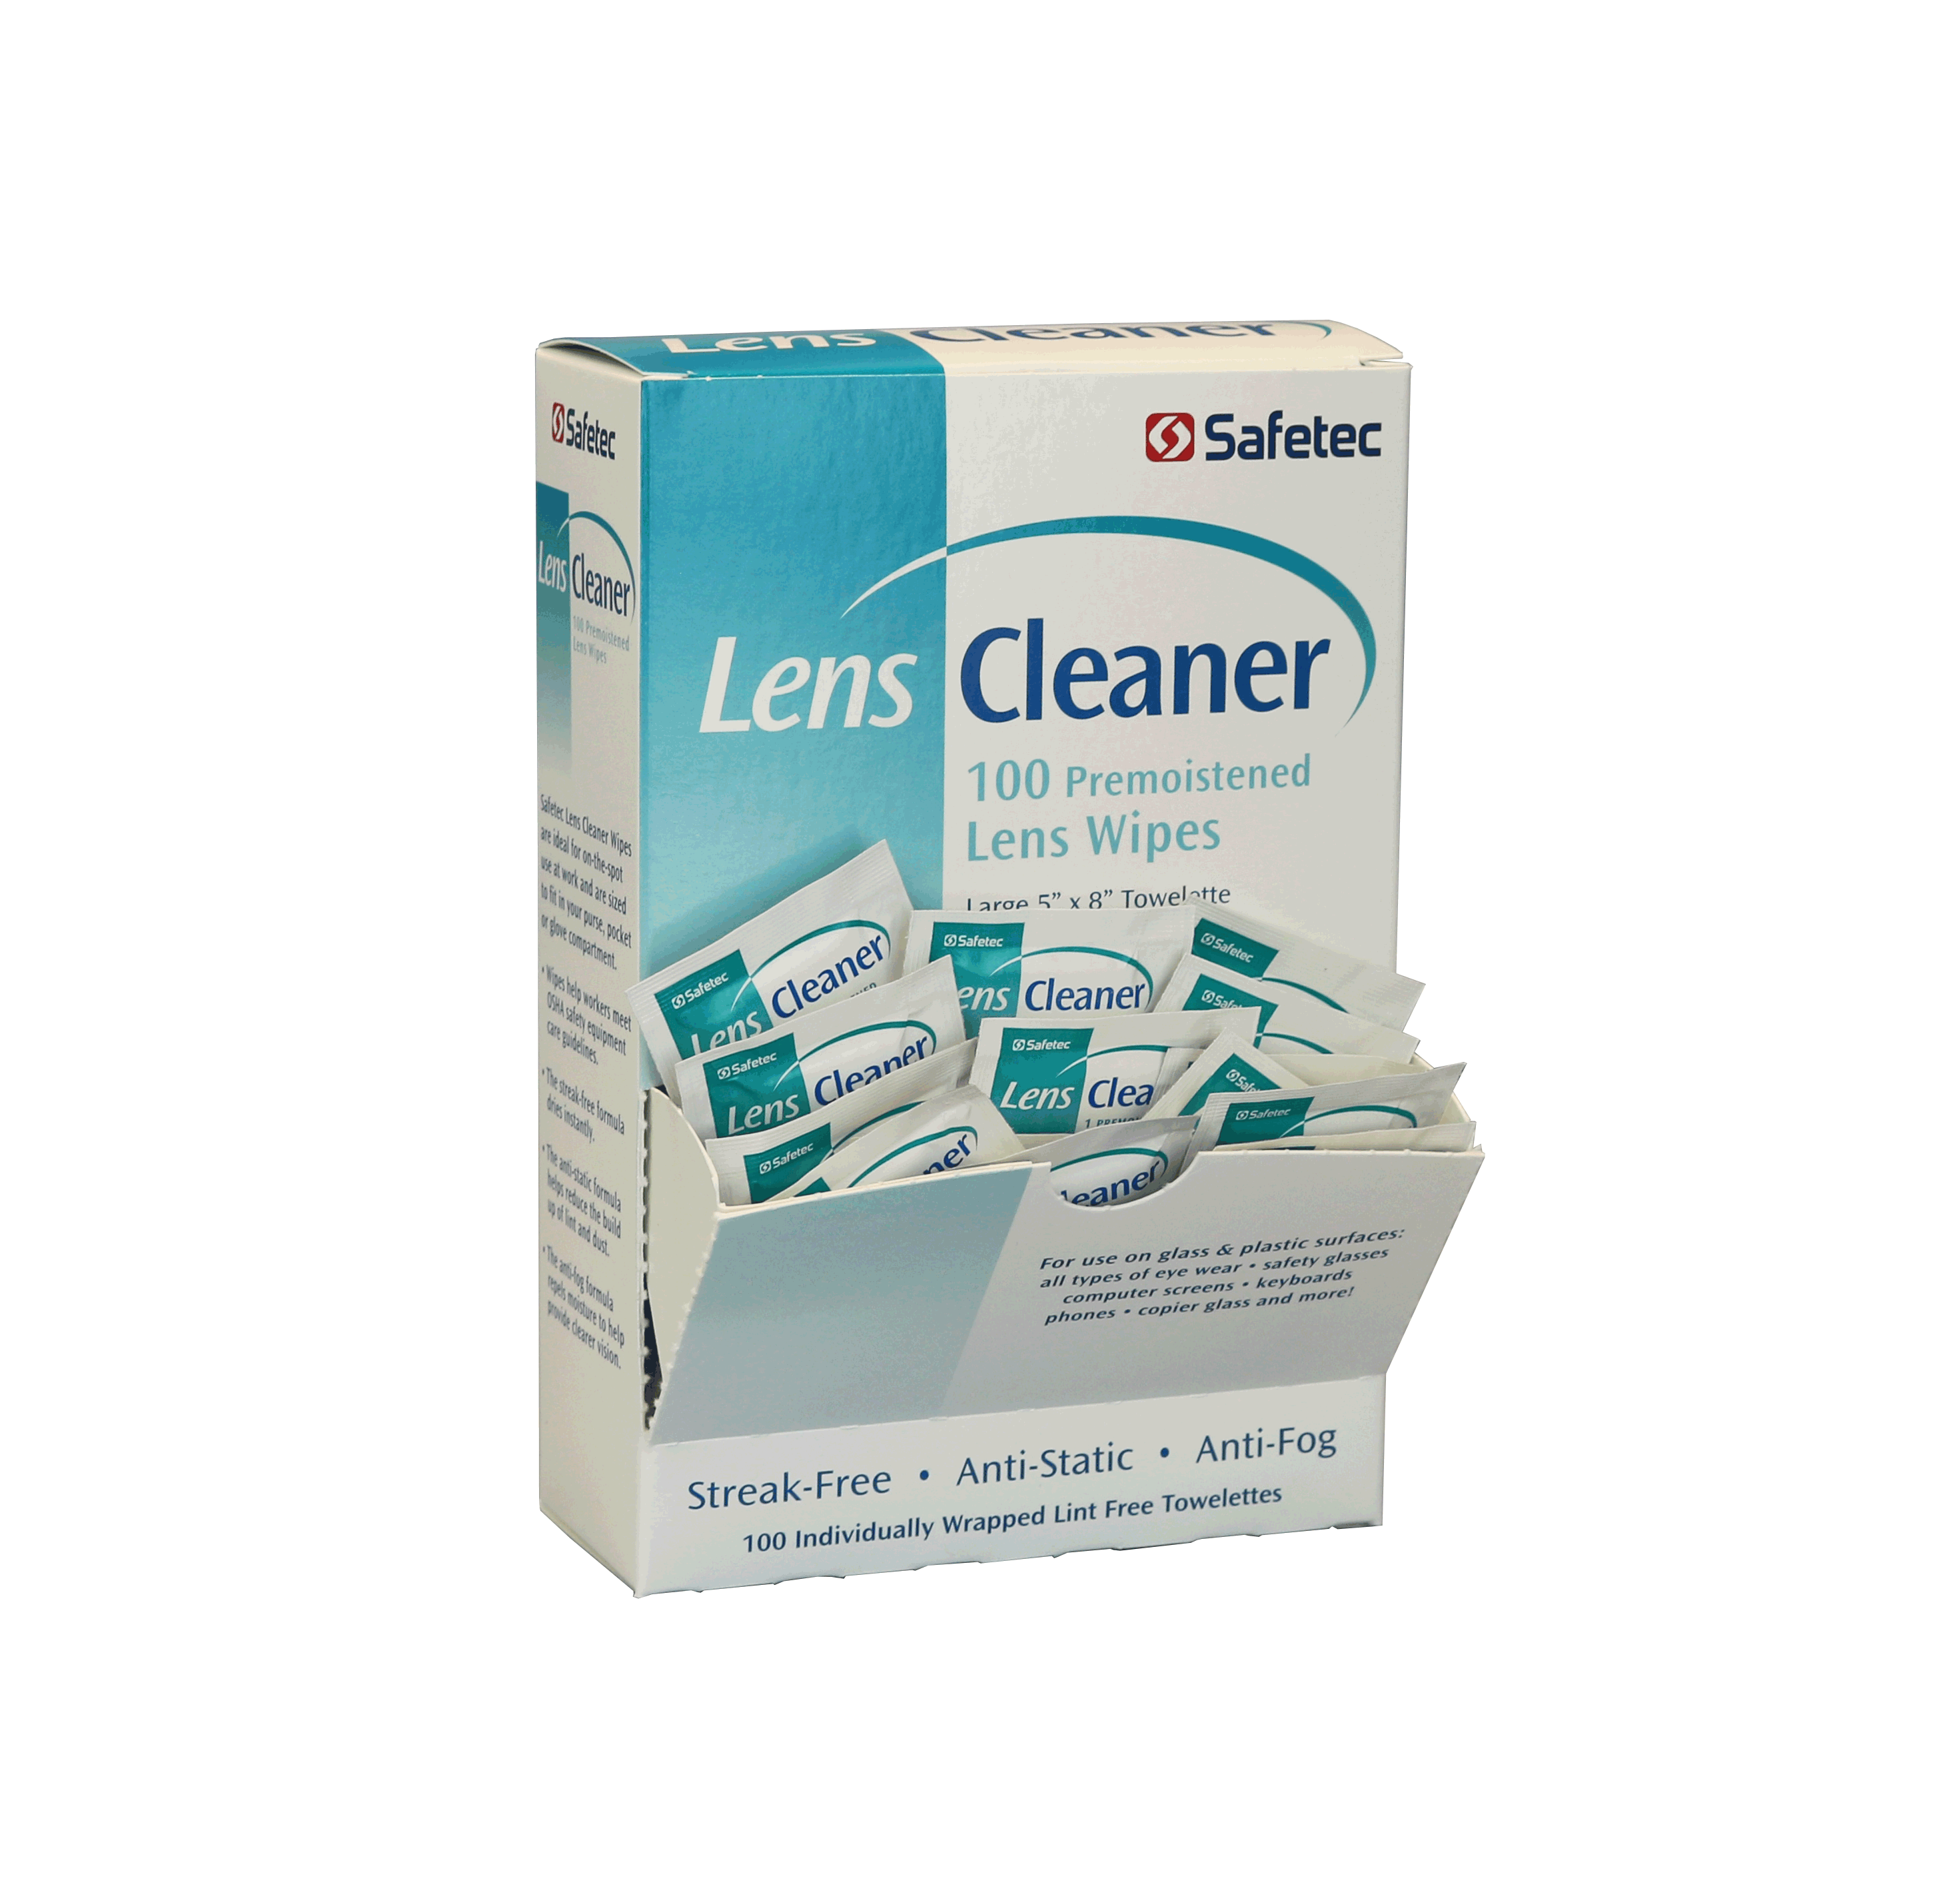 Safetec Lens Cleaner, Large 5x8 Towelette - 100/box • First Aid